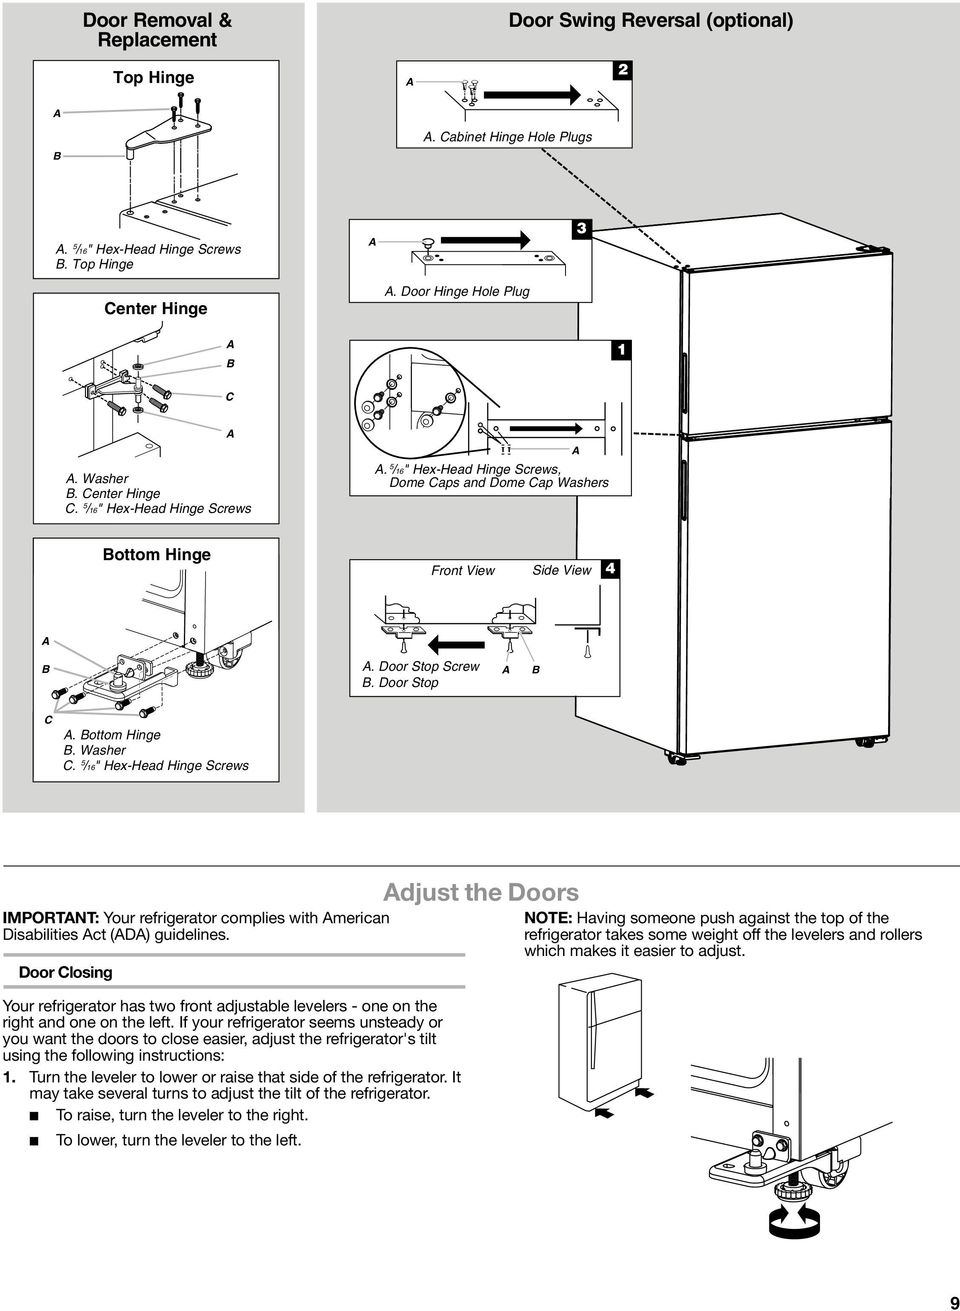 5 /16" Hex-Head Hinge Screws IMPORTNT: Your refrigerator complies with merican Disabilities ct (D) guidelines.